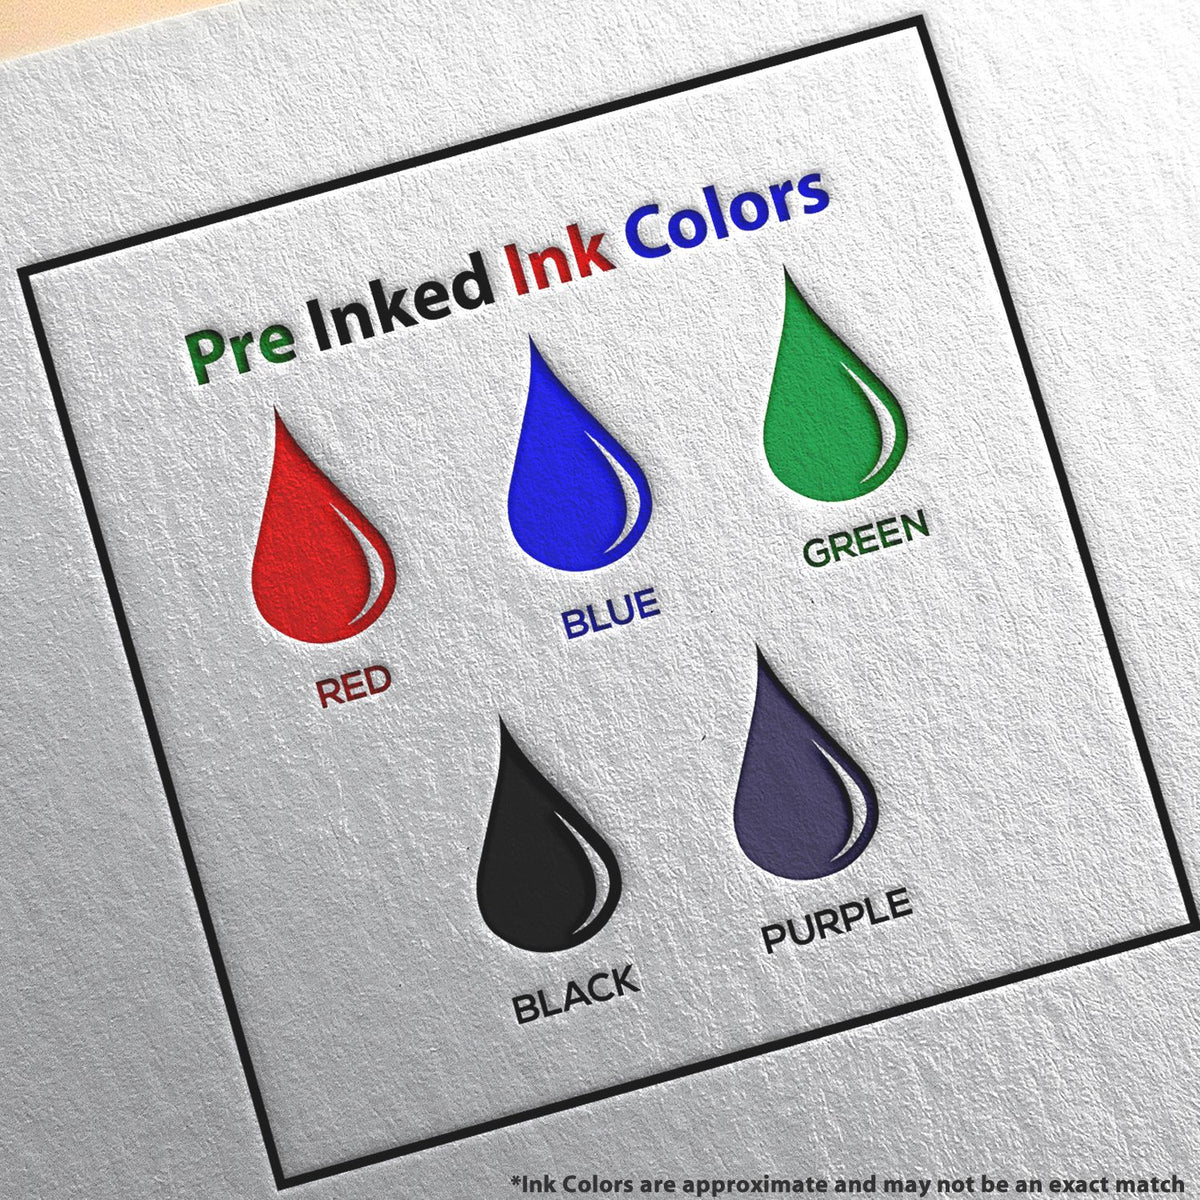 A picture showing the different ink colors or hues available for the MaxLight Premium Pre-Inked Delaware State Seal Notarial Stamp product.